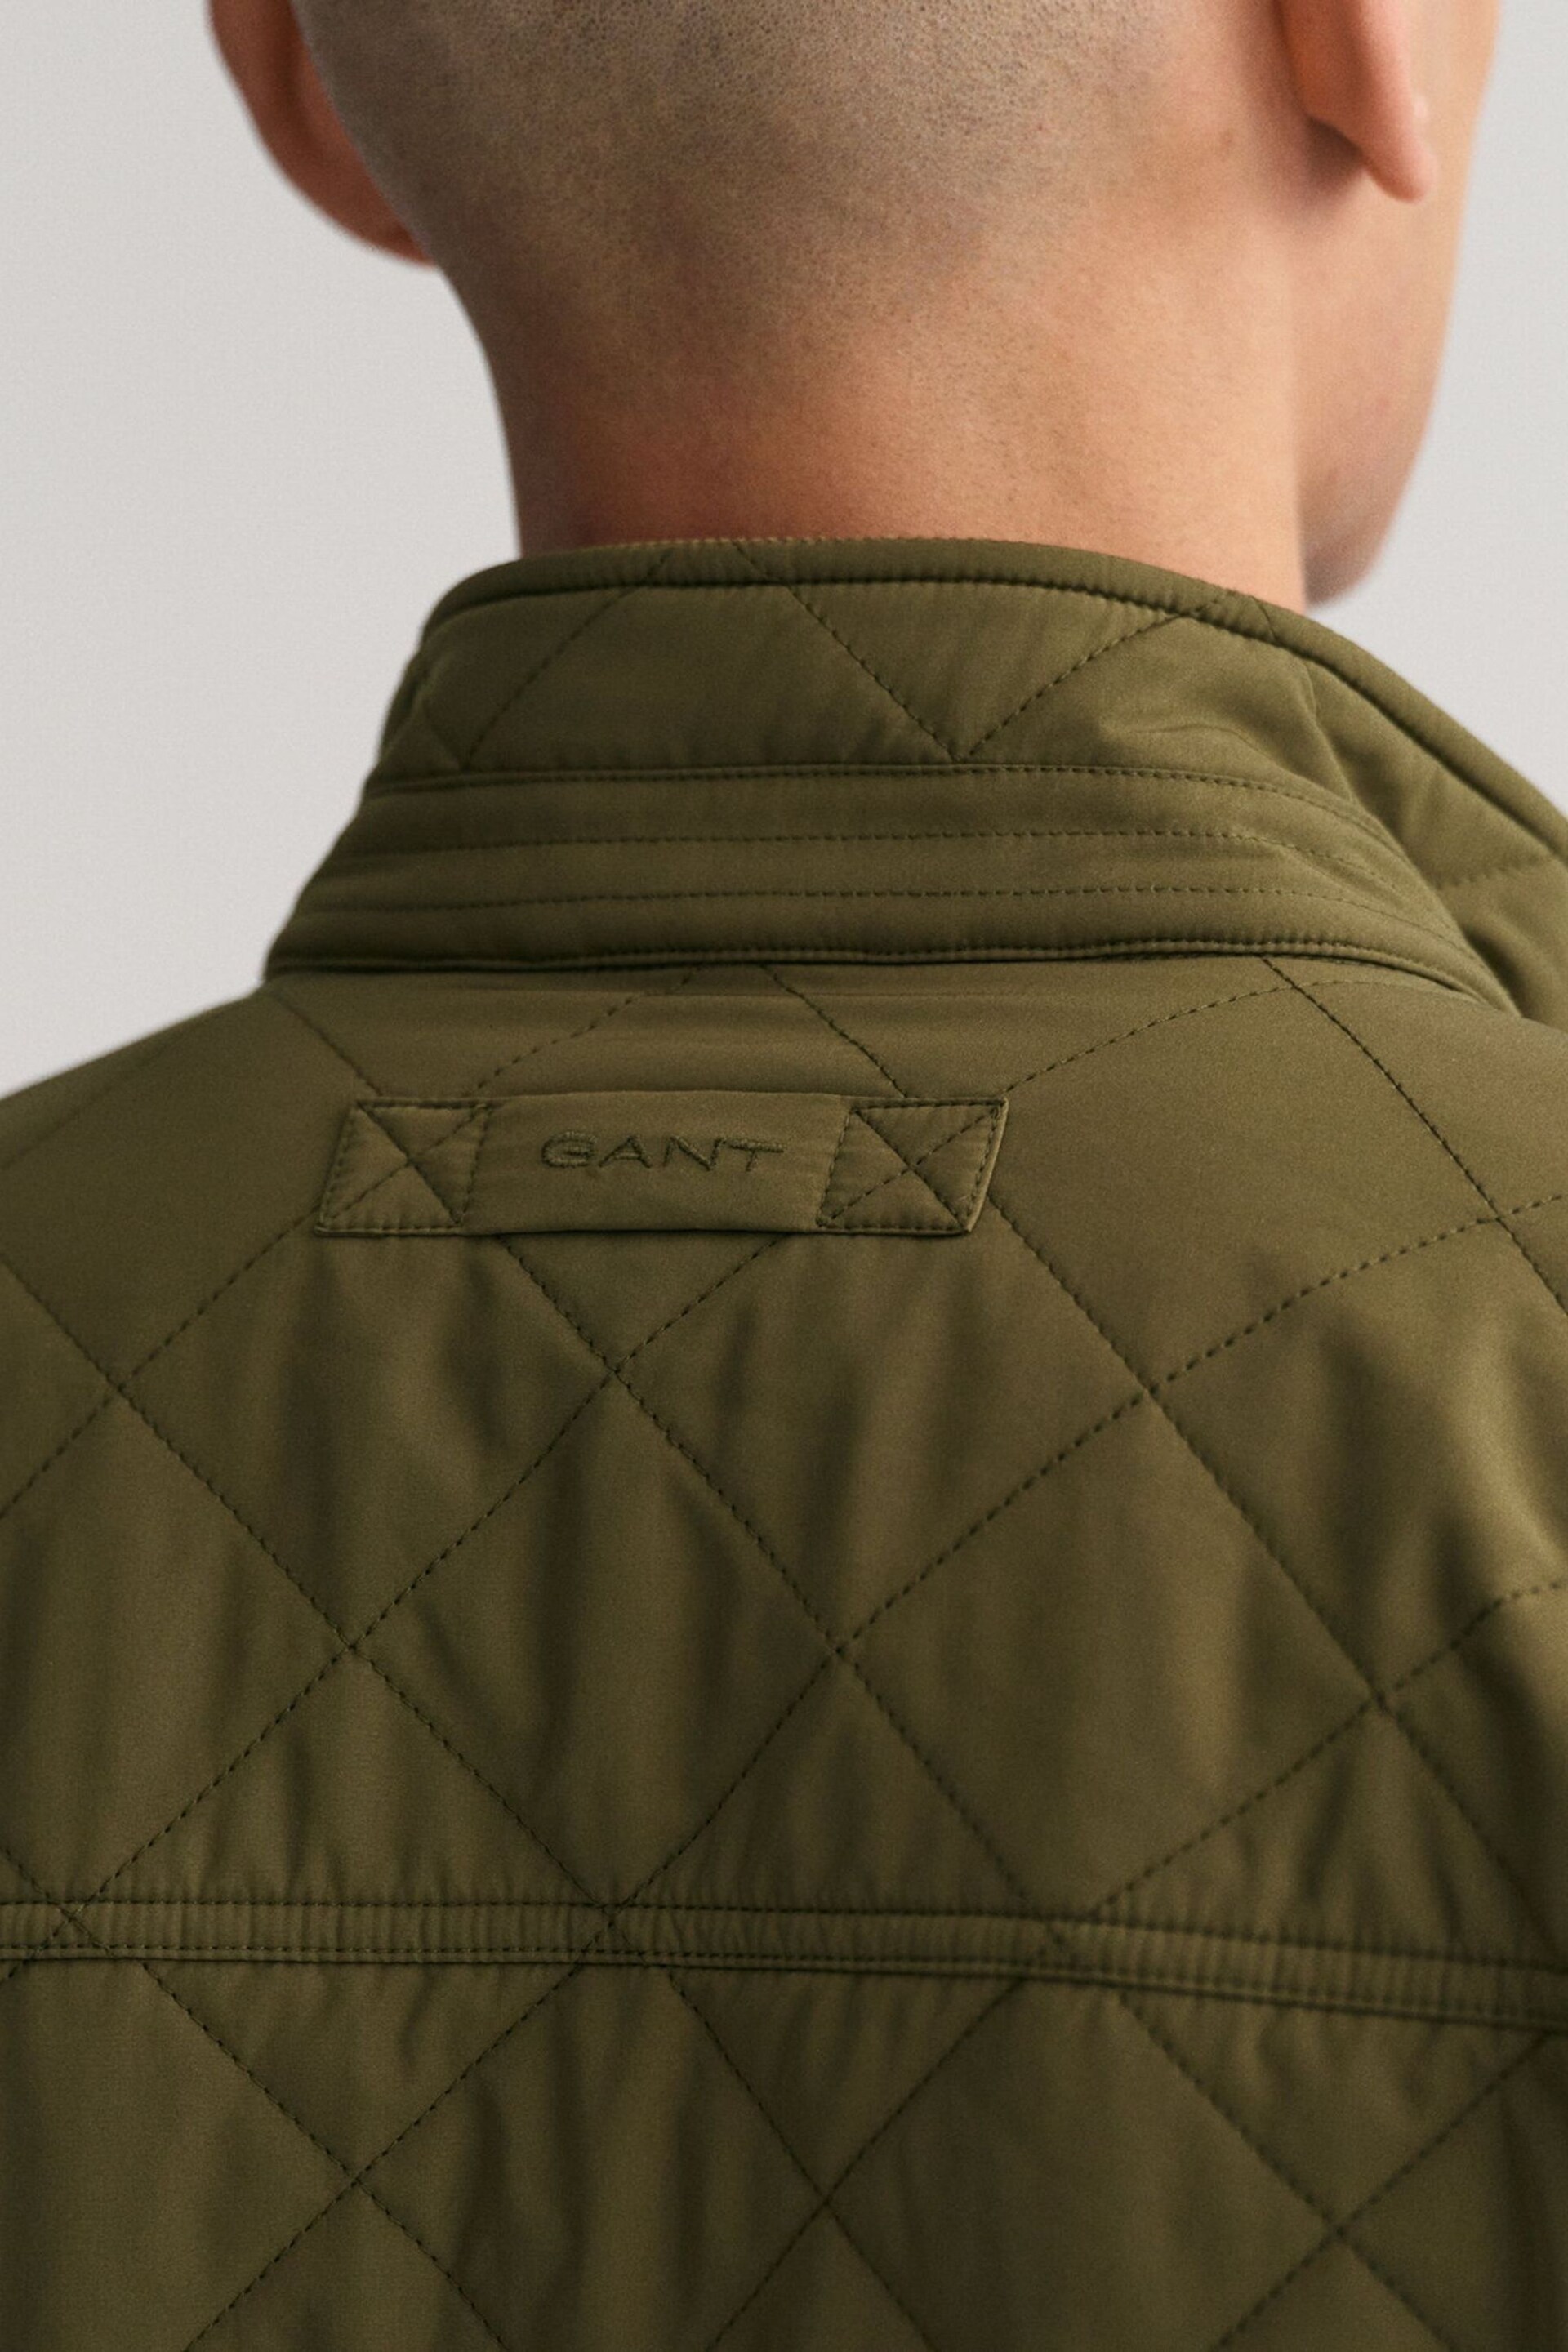 GANT Green Quilted Windcheater Jacket - Image 4 of 6